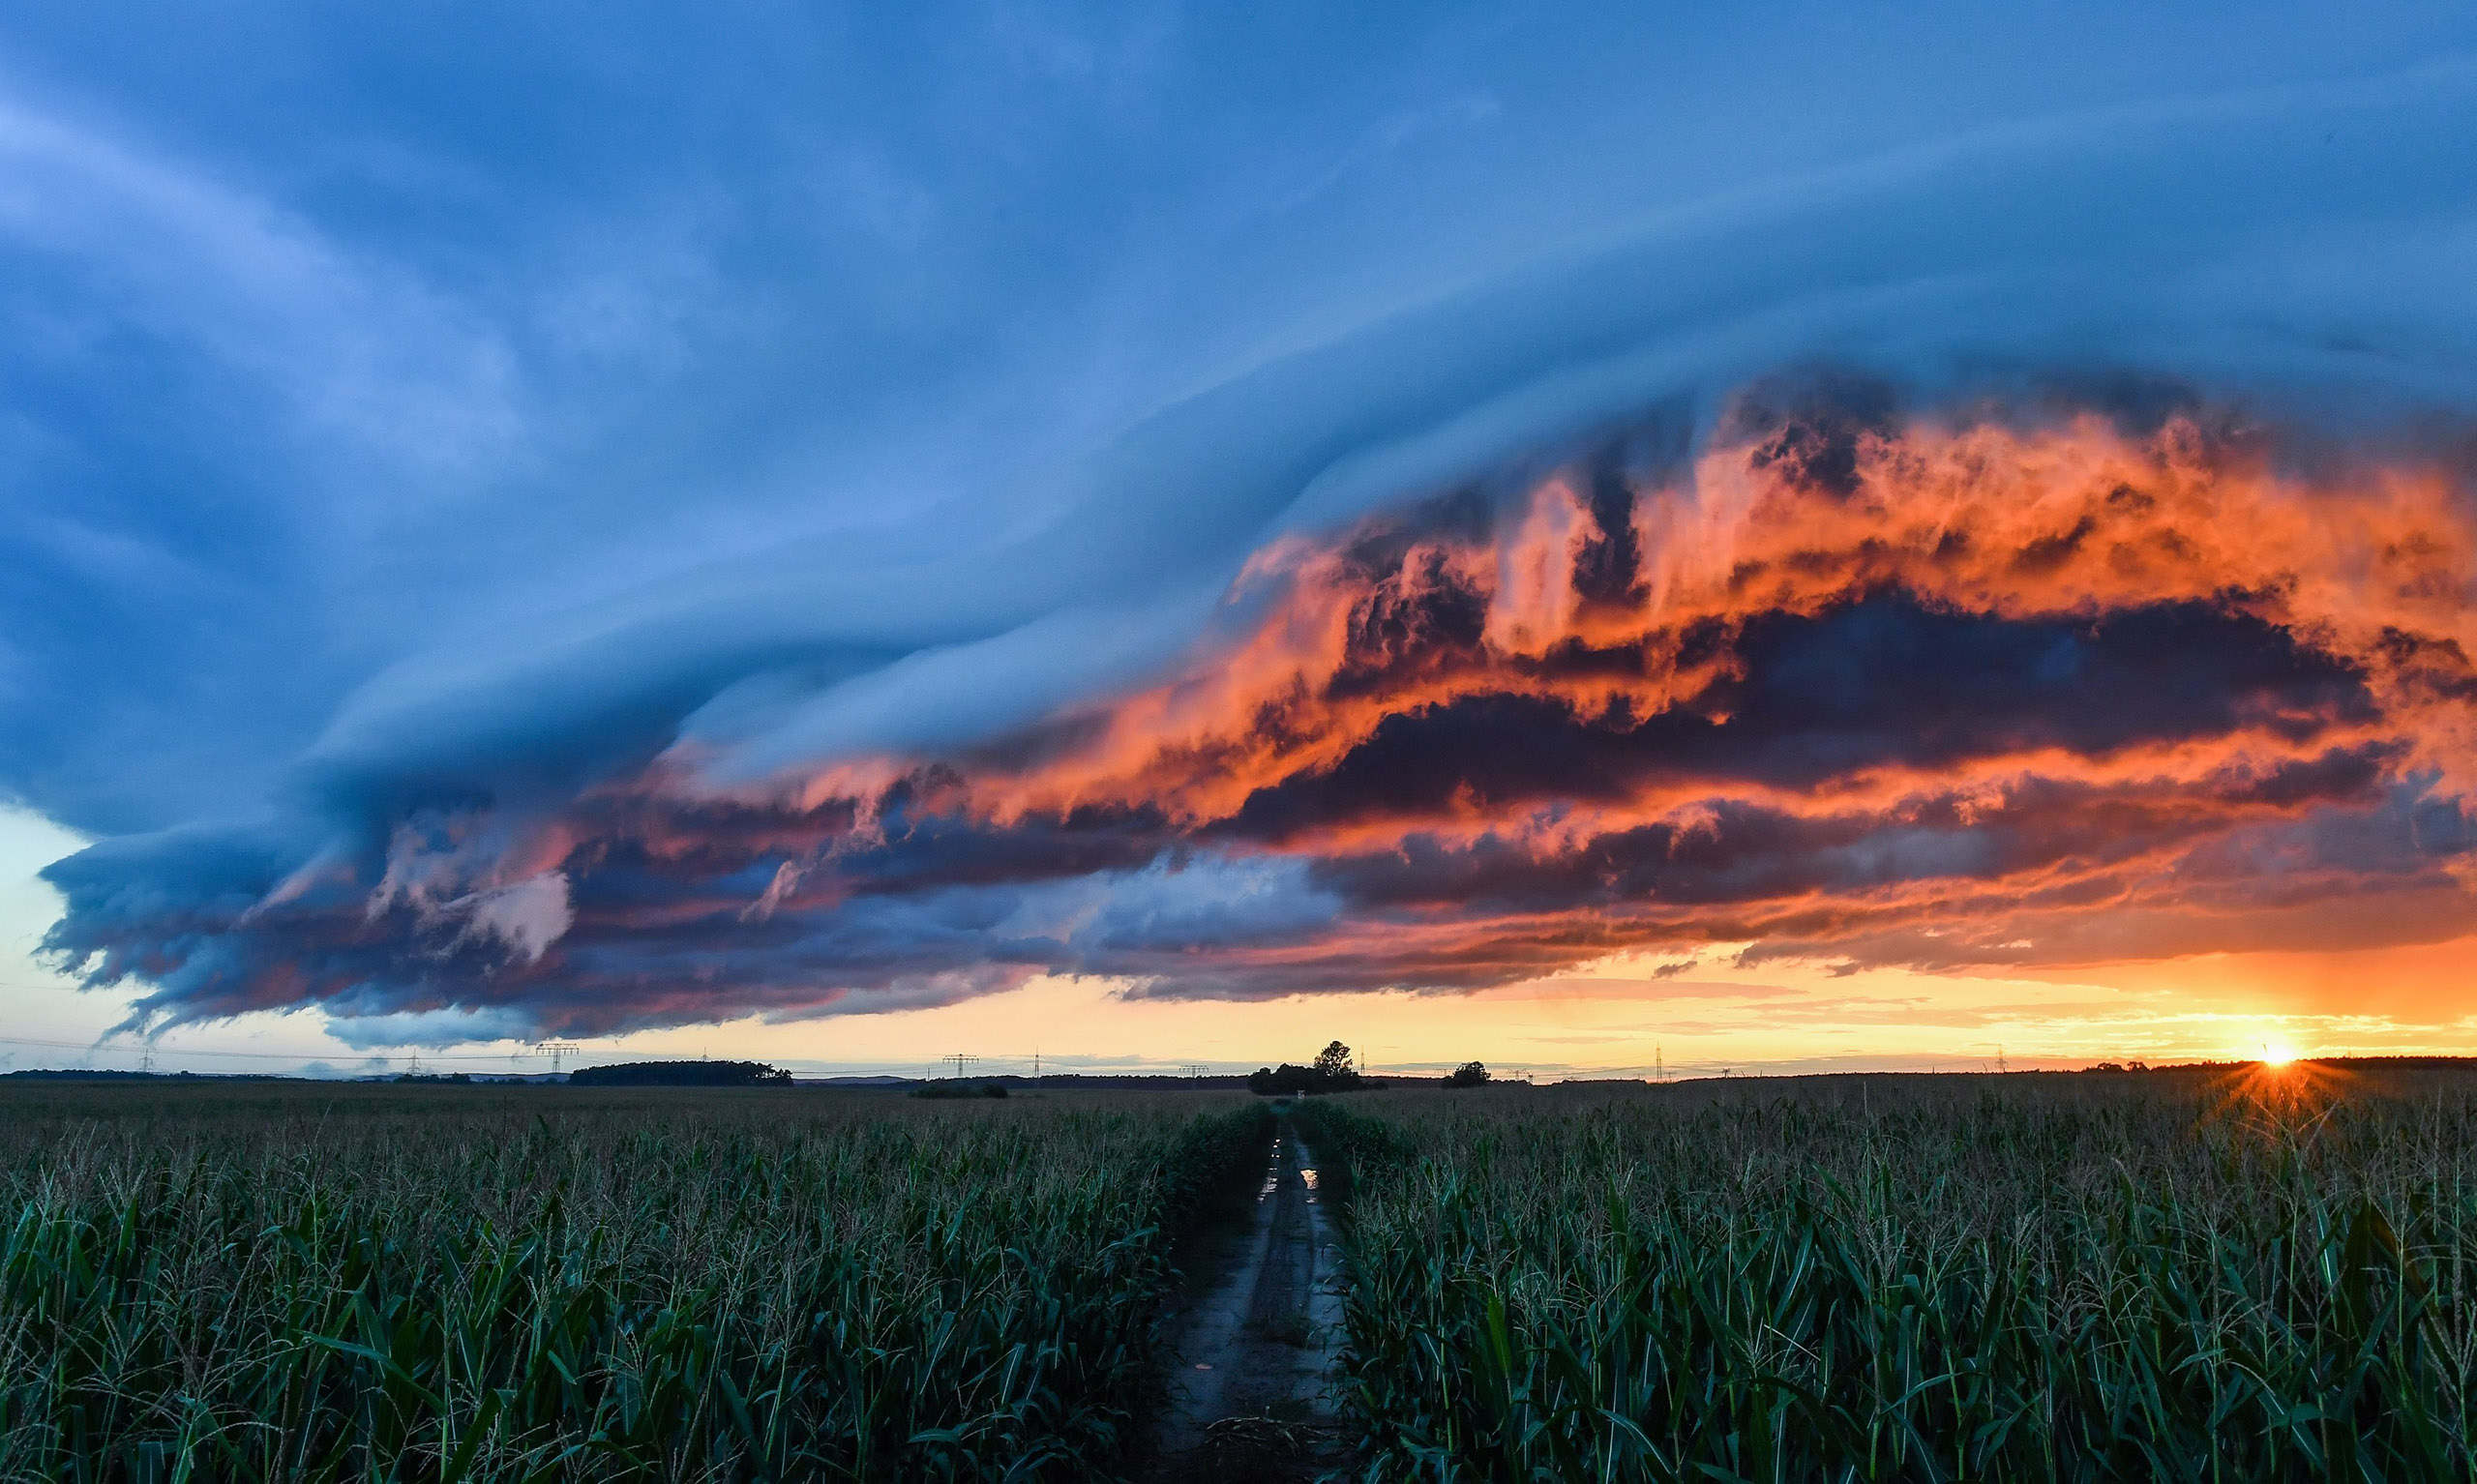 Storm clouds dramatically illuminated by the setting sun on a corn field in Petersdorf, Germany, Aug. 21, 2016.